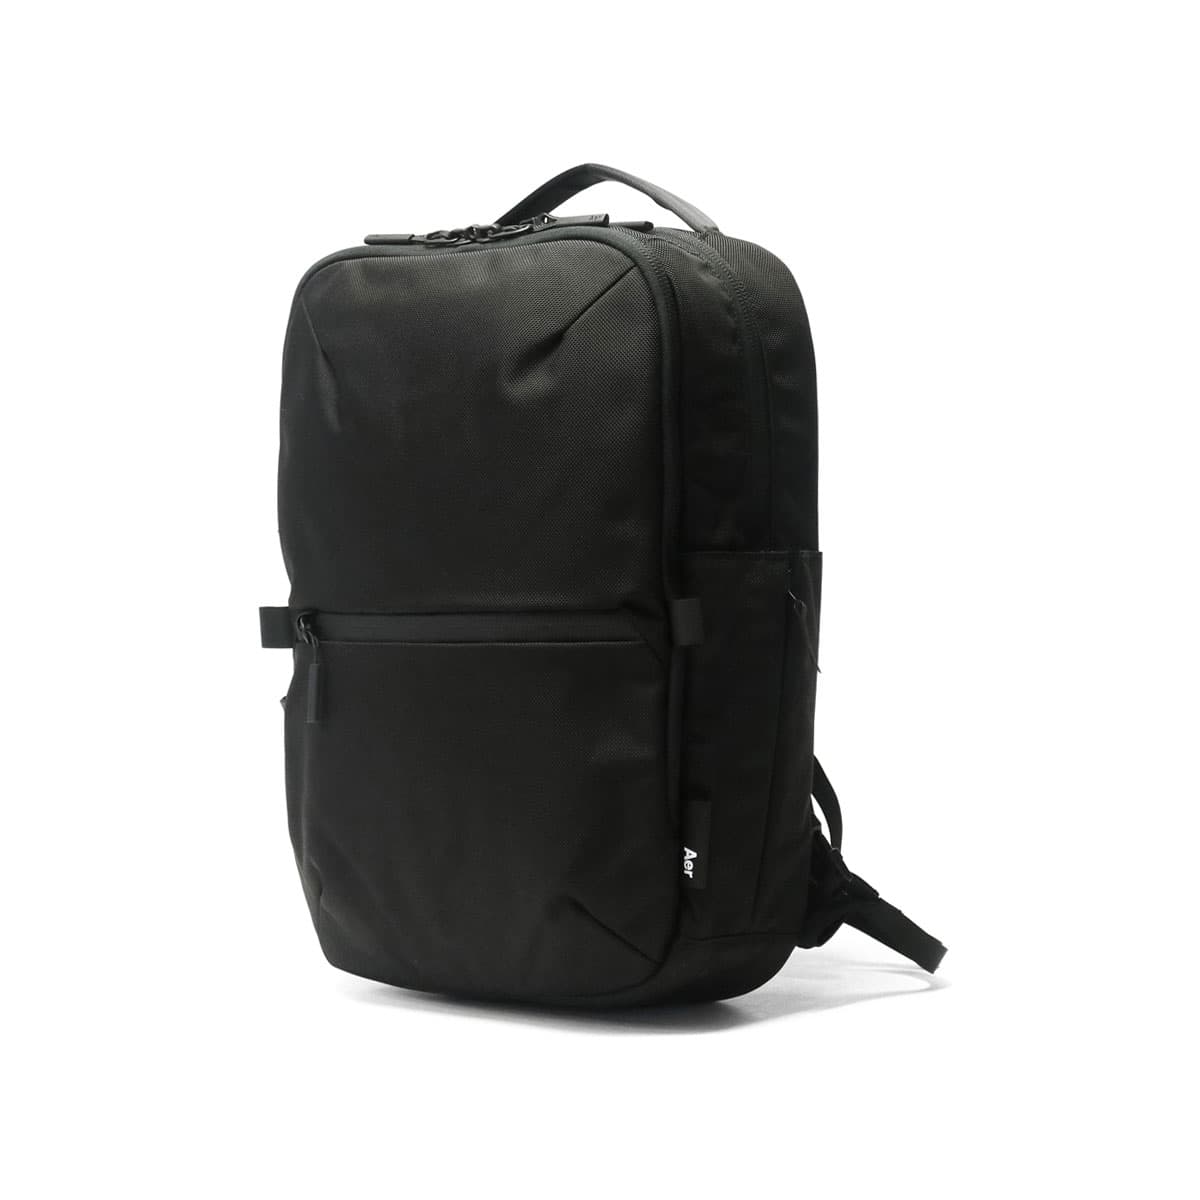 Aer エアー Travel Collection Flight Pack 3 3wayバックパック L